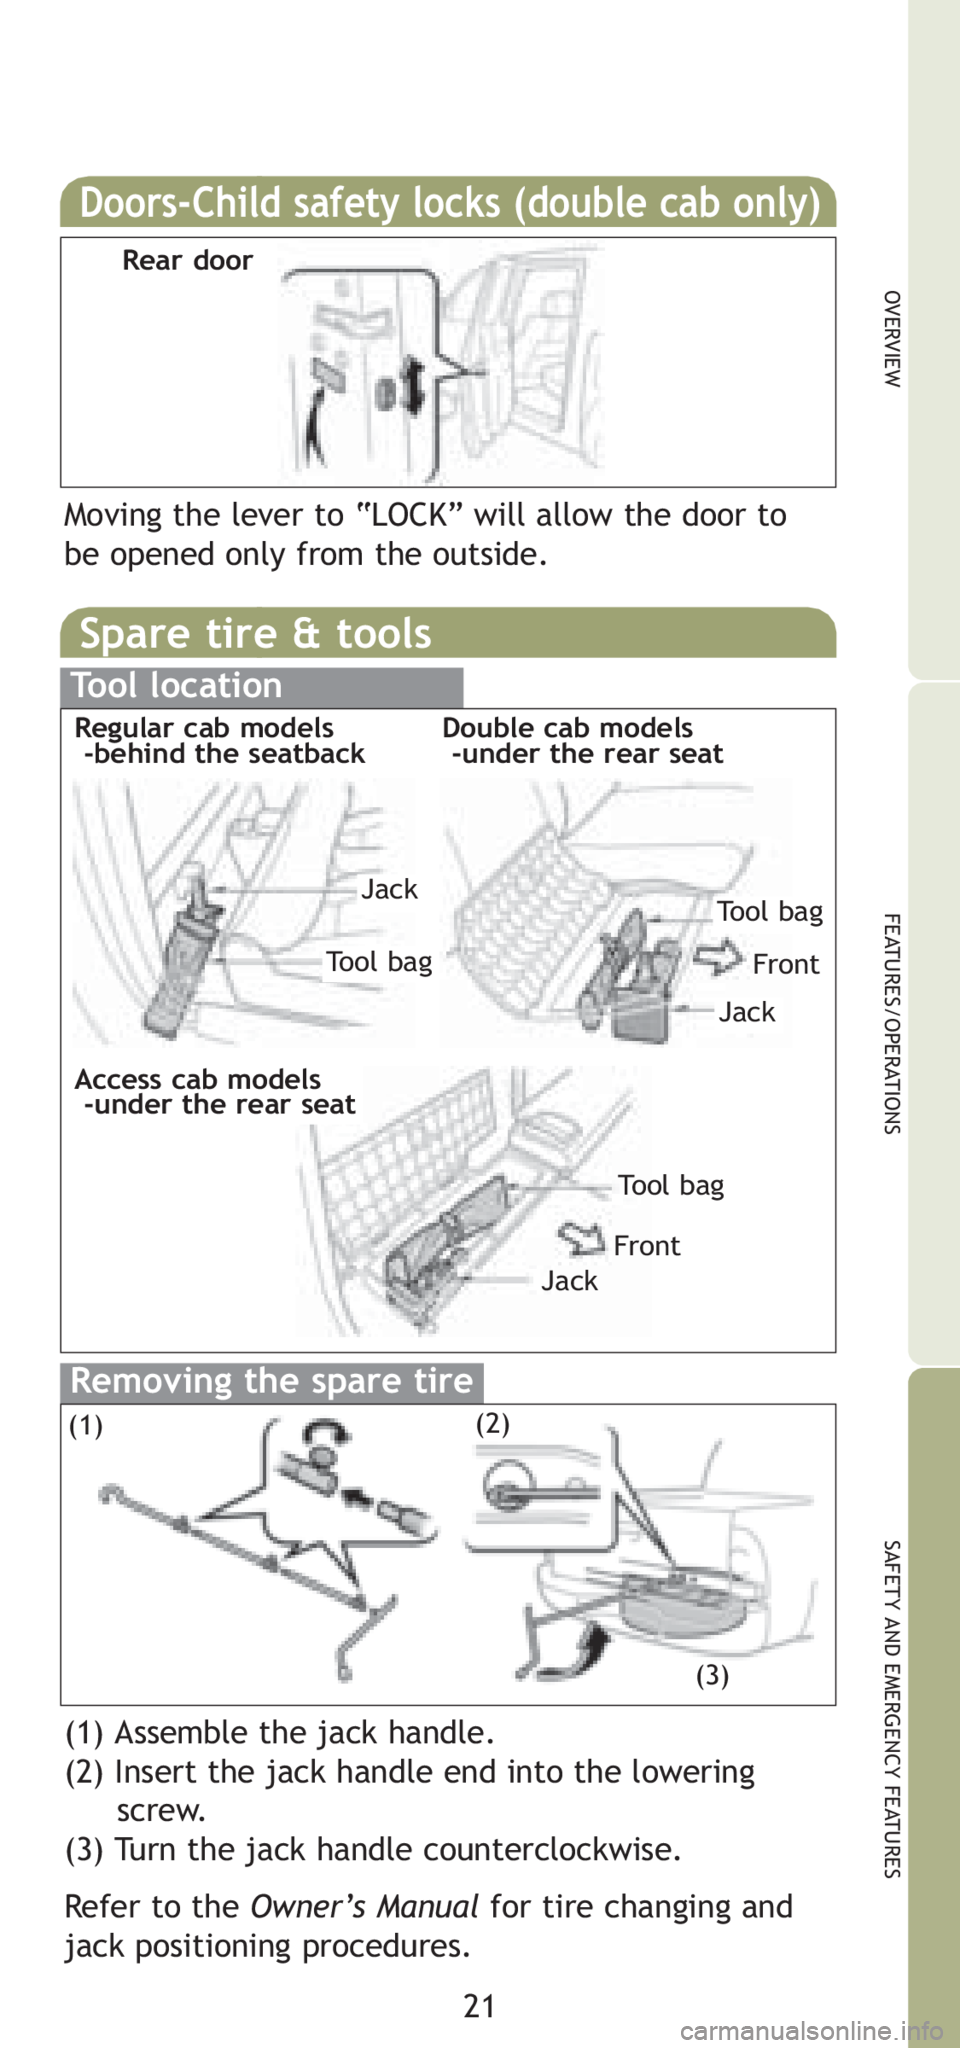 TOYOTA TACOMA 2008   (in English) Owners Manual Spare tire & tools
Tool location
Removing the spare tire
21
OVERVIEW
FEATURES/OPERATIONS
SAFETY AND EMERGENCY FEATURES
(1) Assemble the jack handle.
(2) Insert the jack handle end into the lowering
sc